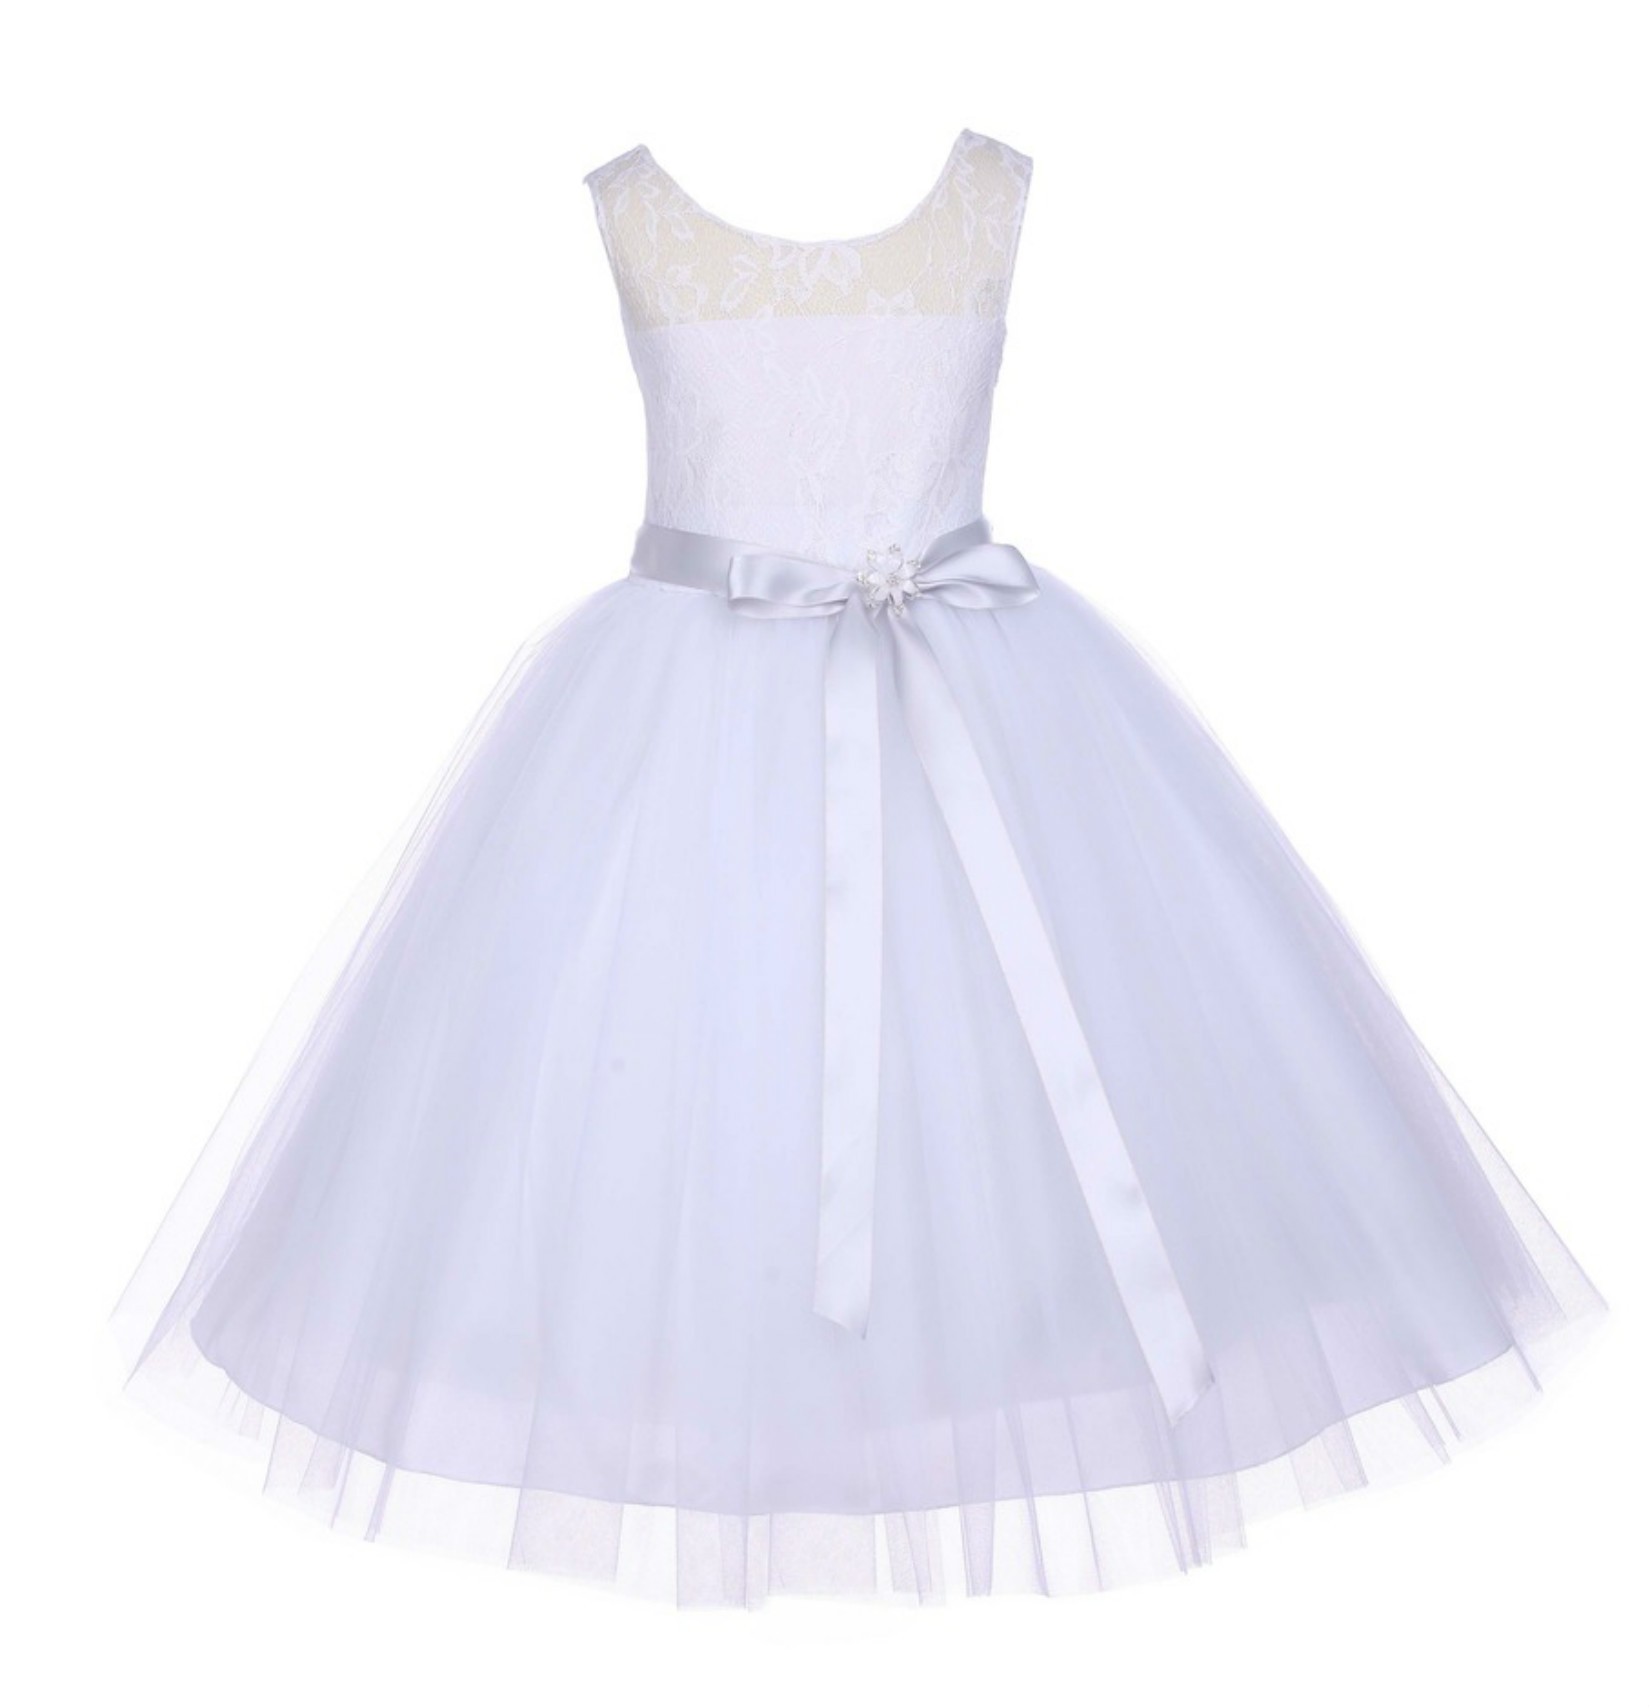 White Floral Lace Bodice Tulle White Ribbon Flower Girl Dress 153R